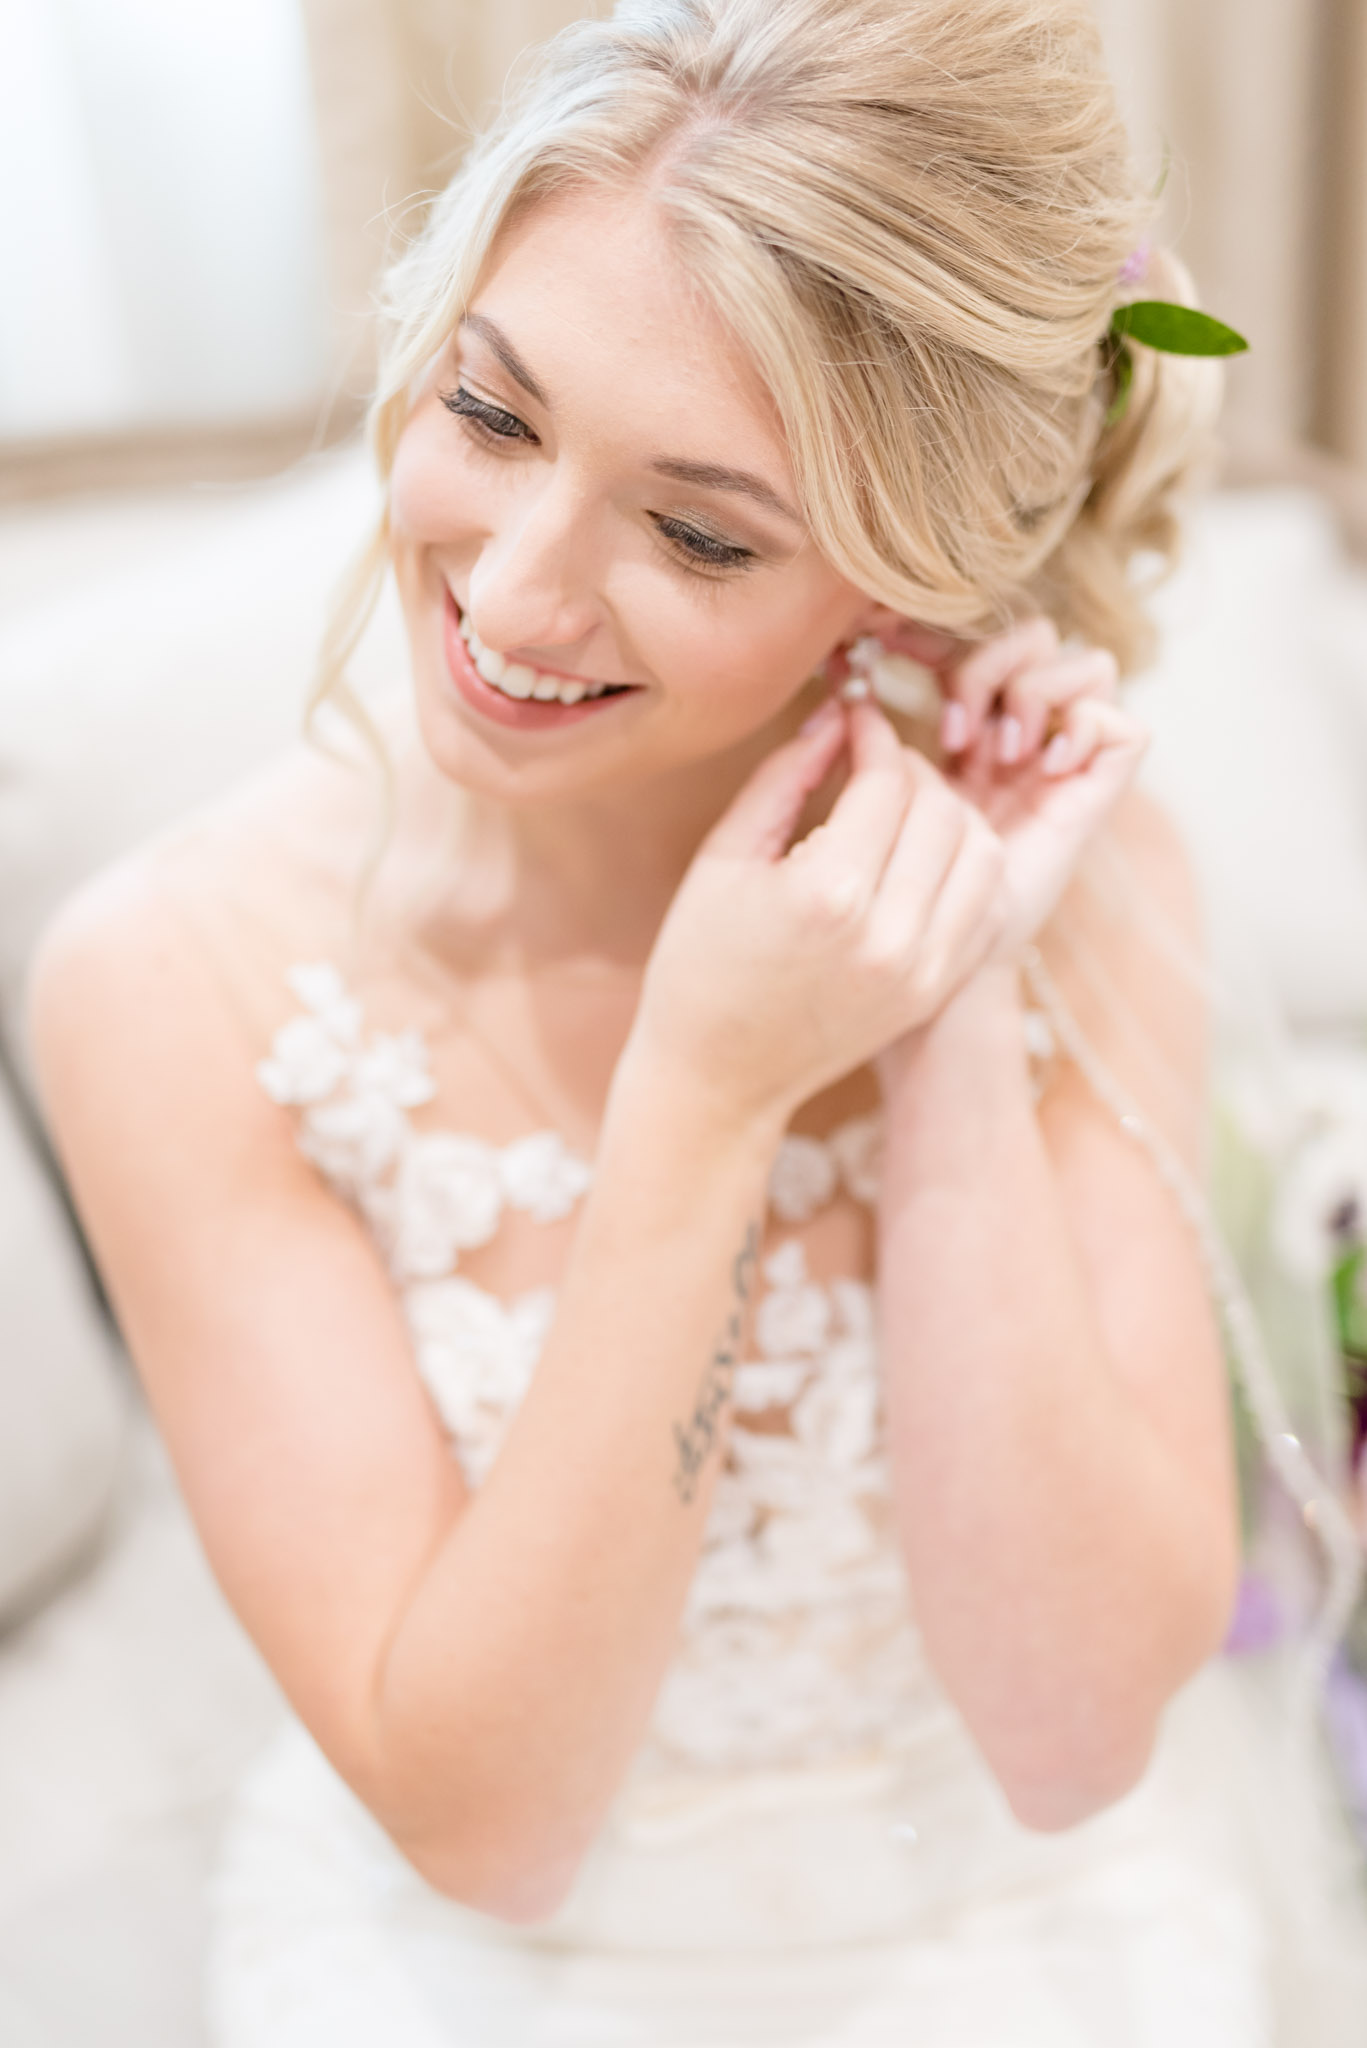 Bride puts on earring.